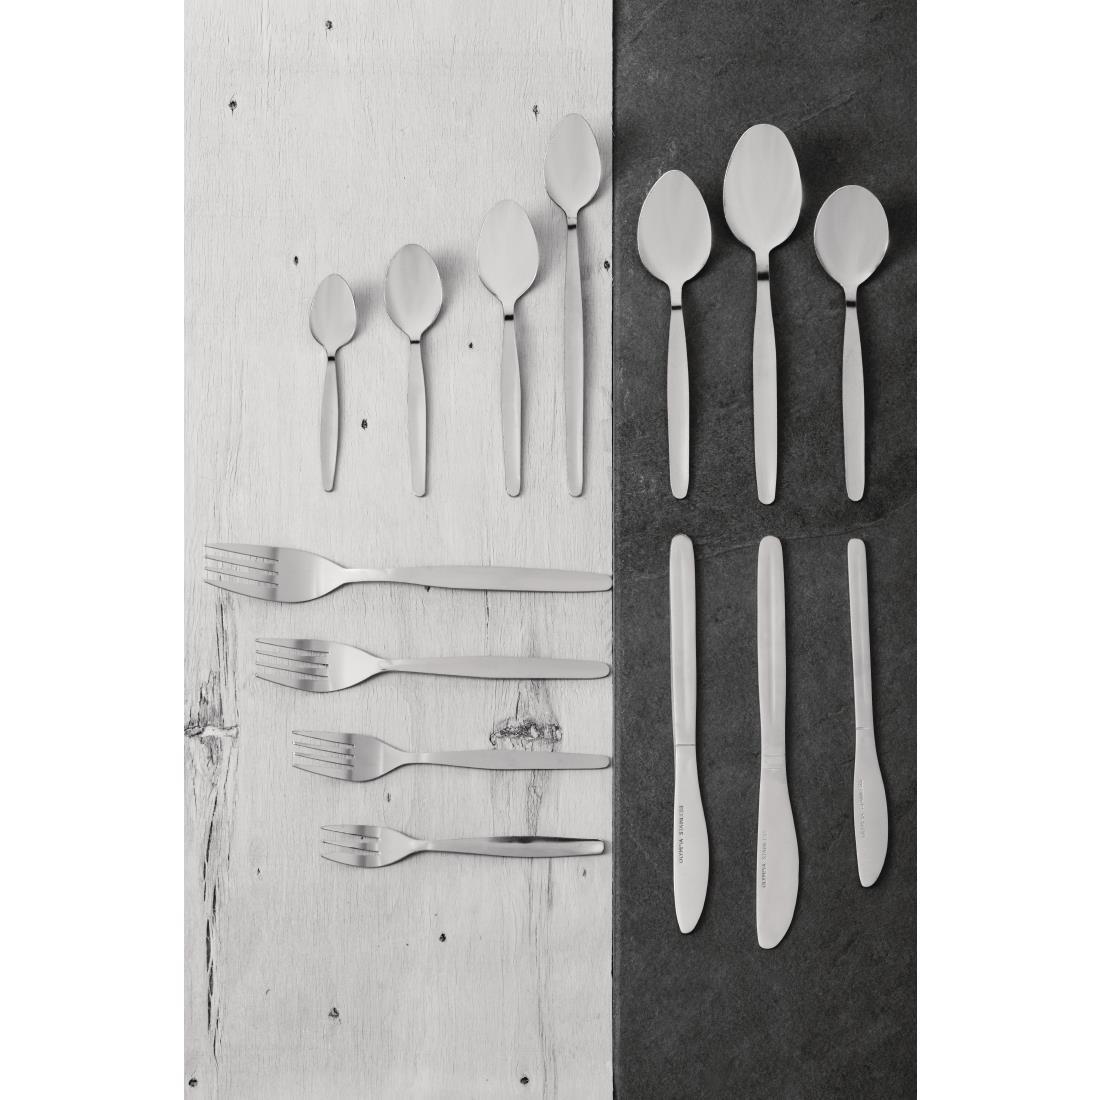 Olympia Kelso Childrens Spoon (Pack of 12) - CB066  - 3